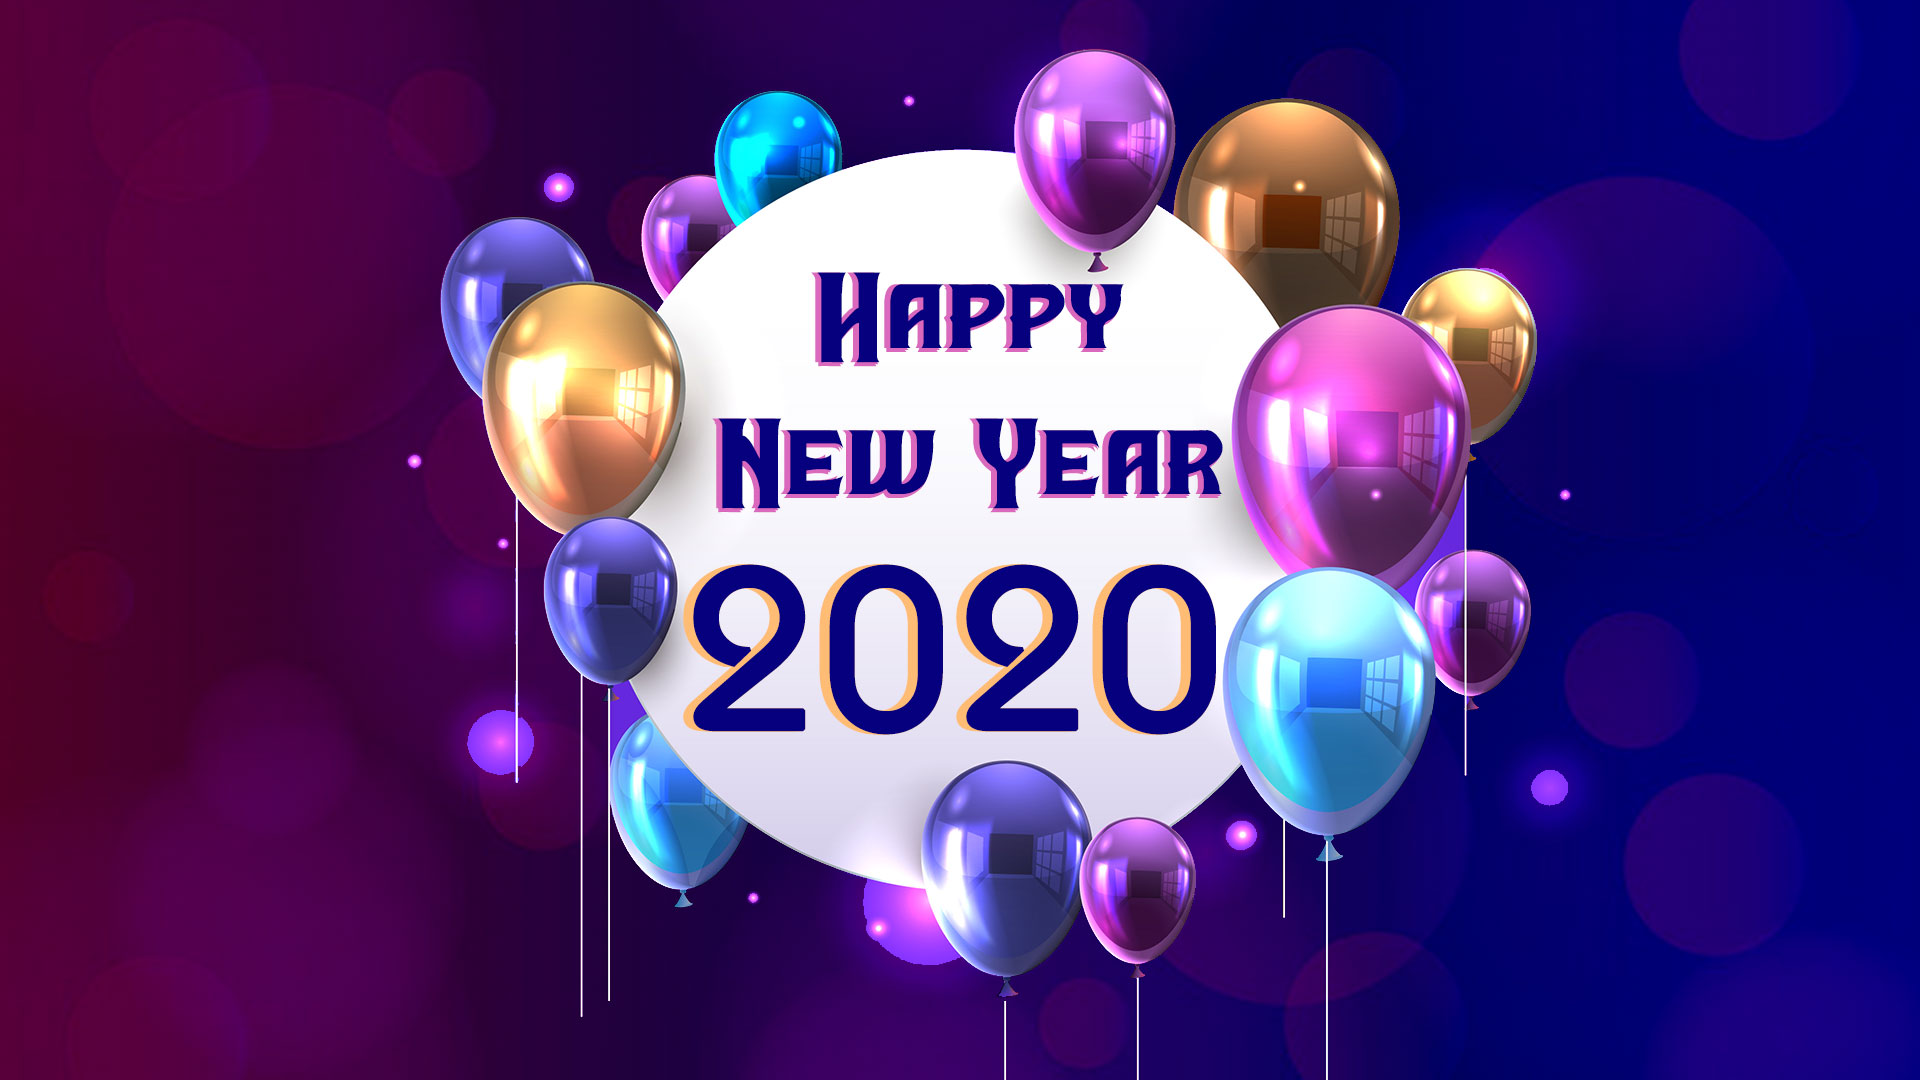 Happy New Year Greetings - Happy New Year 2020 Image Hd , HD Wallpaper & Backgrounds